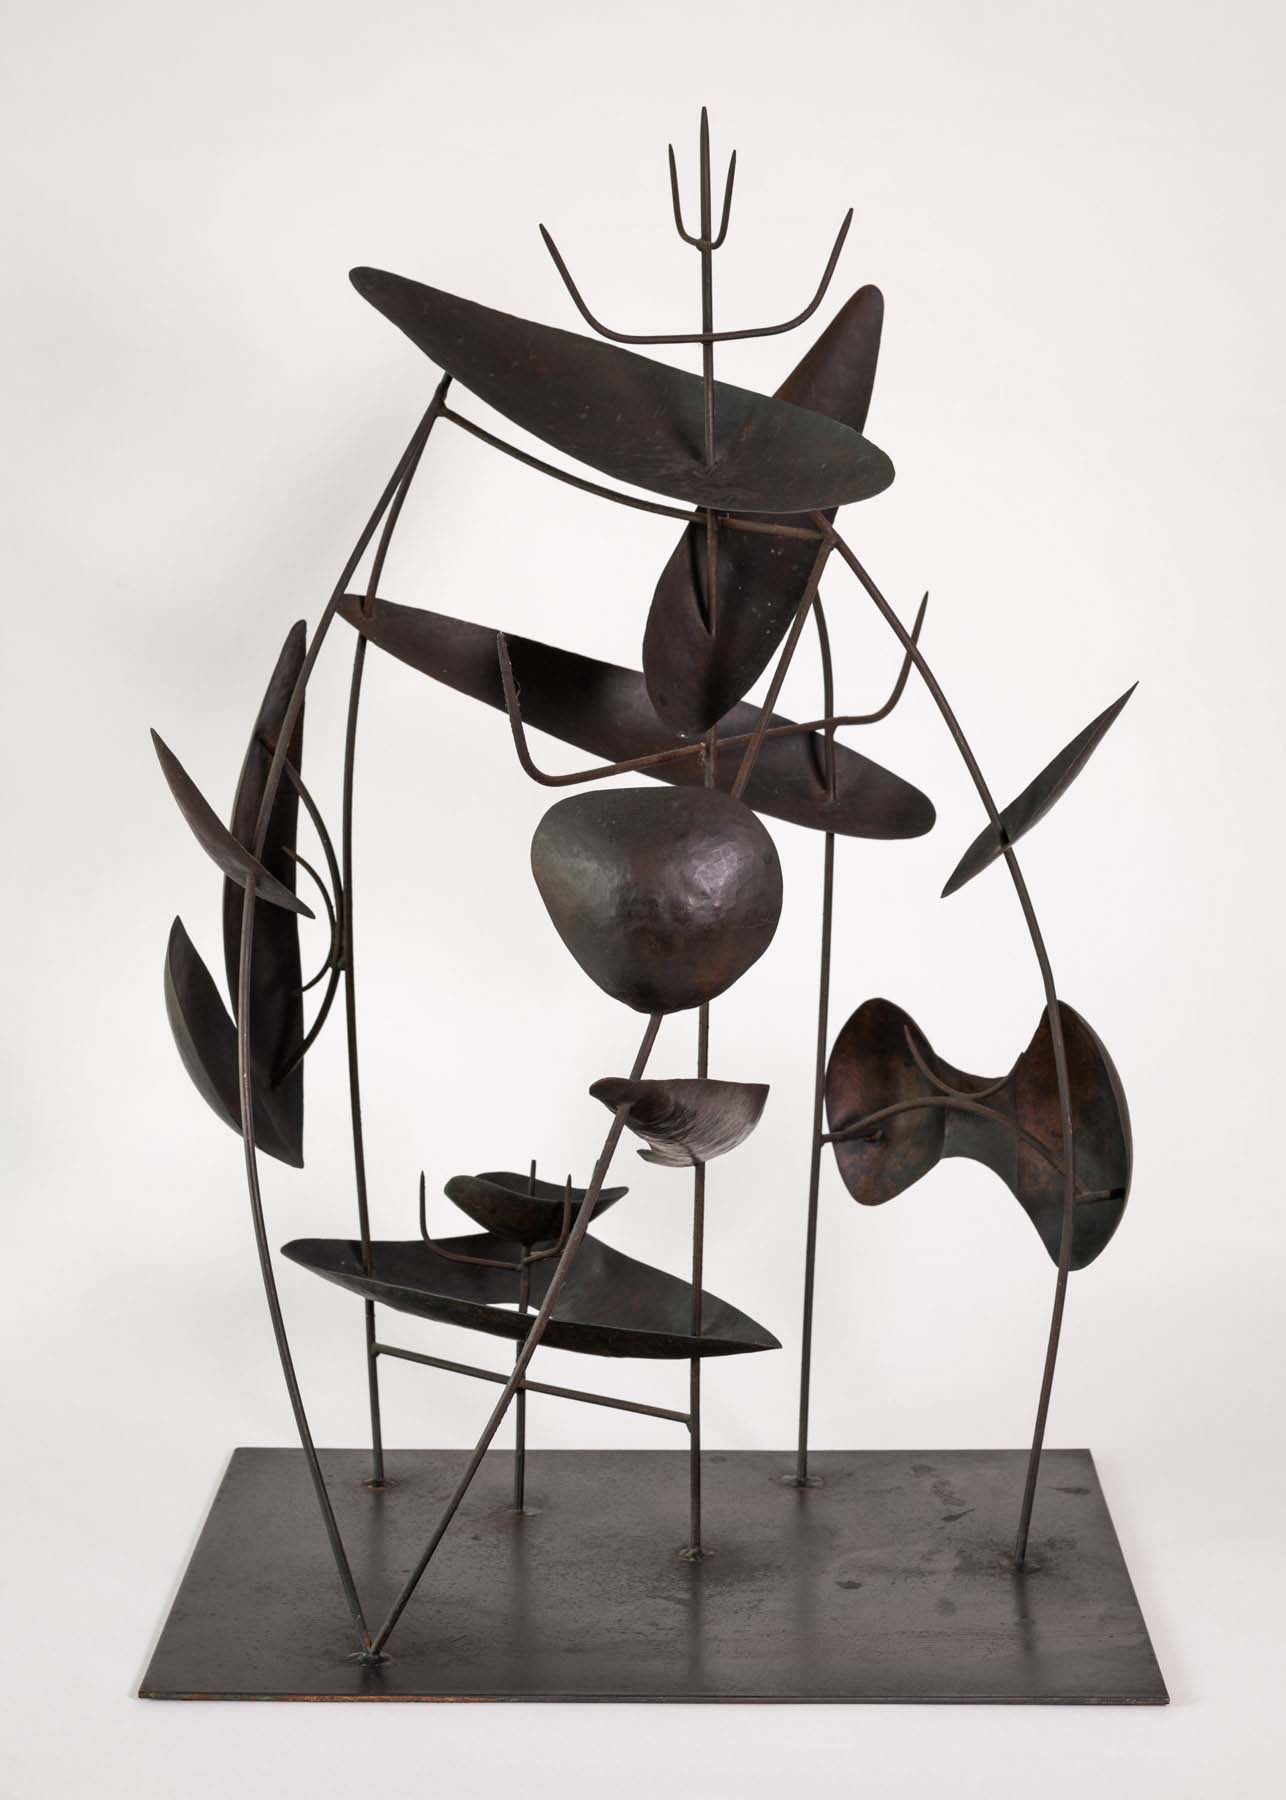 A metal sculpture with long, skinny spikes bent in different directions with organic shapes attached in various spots.